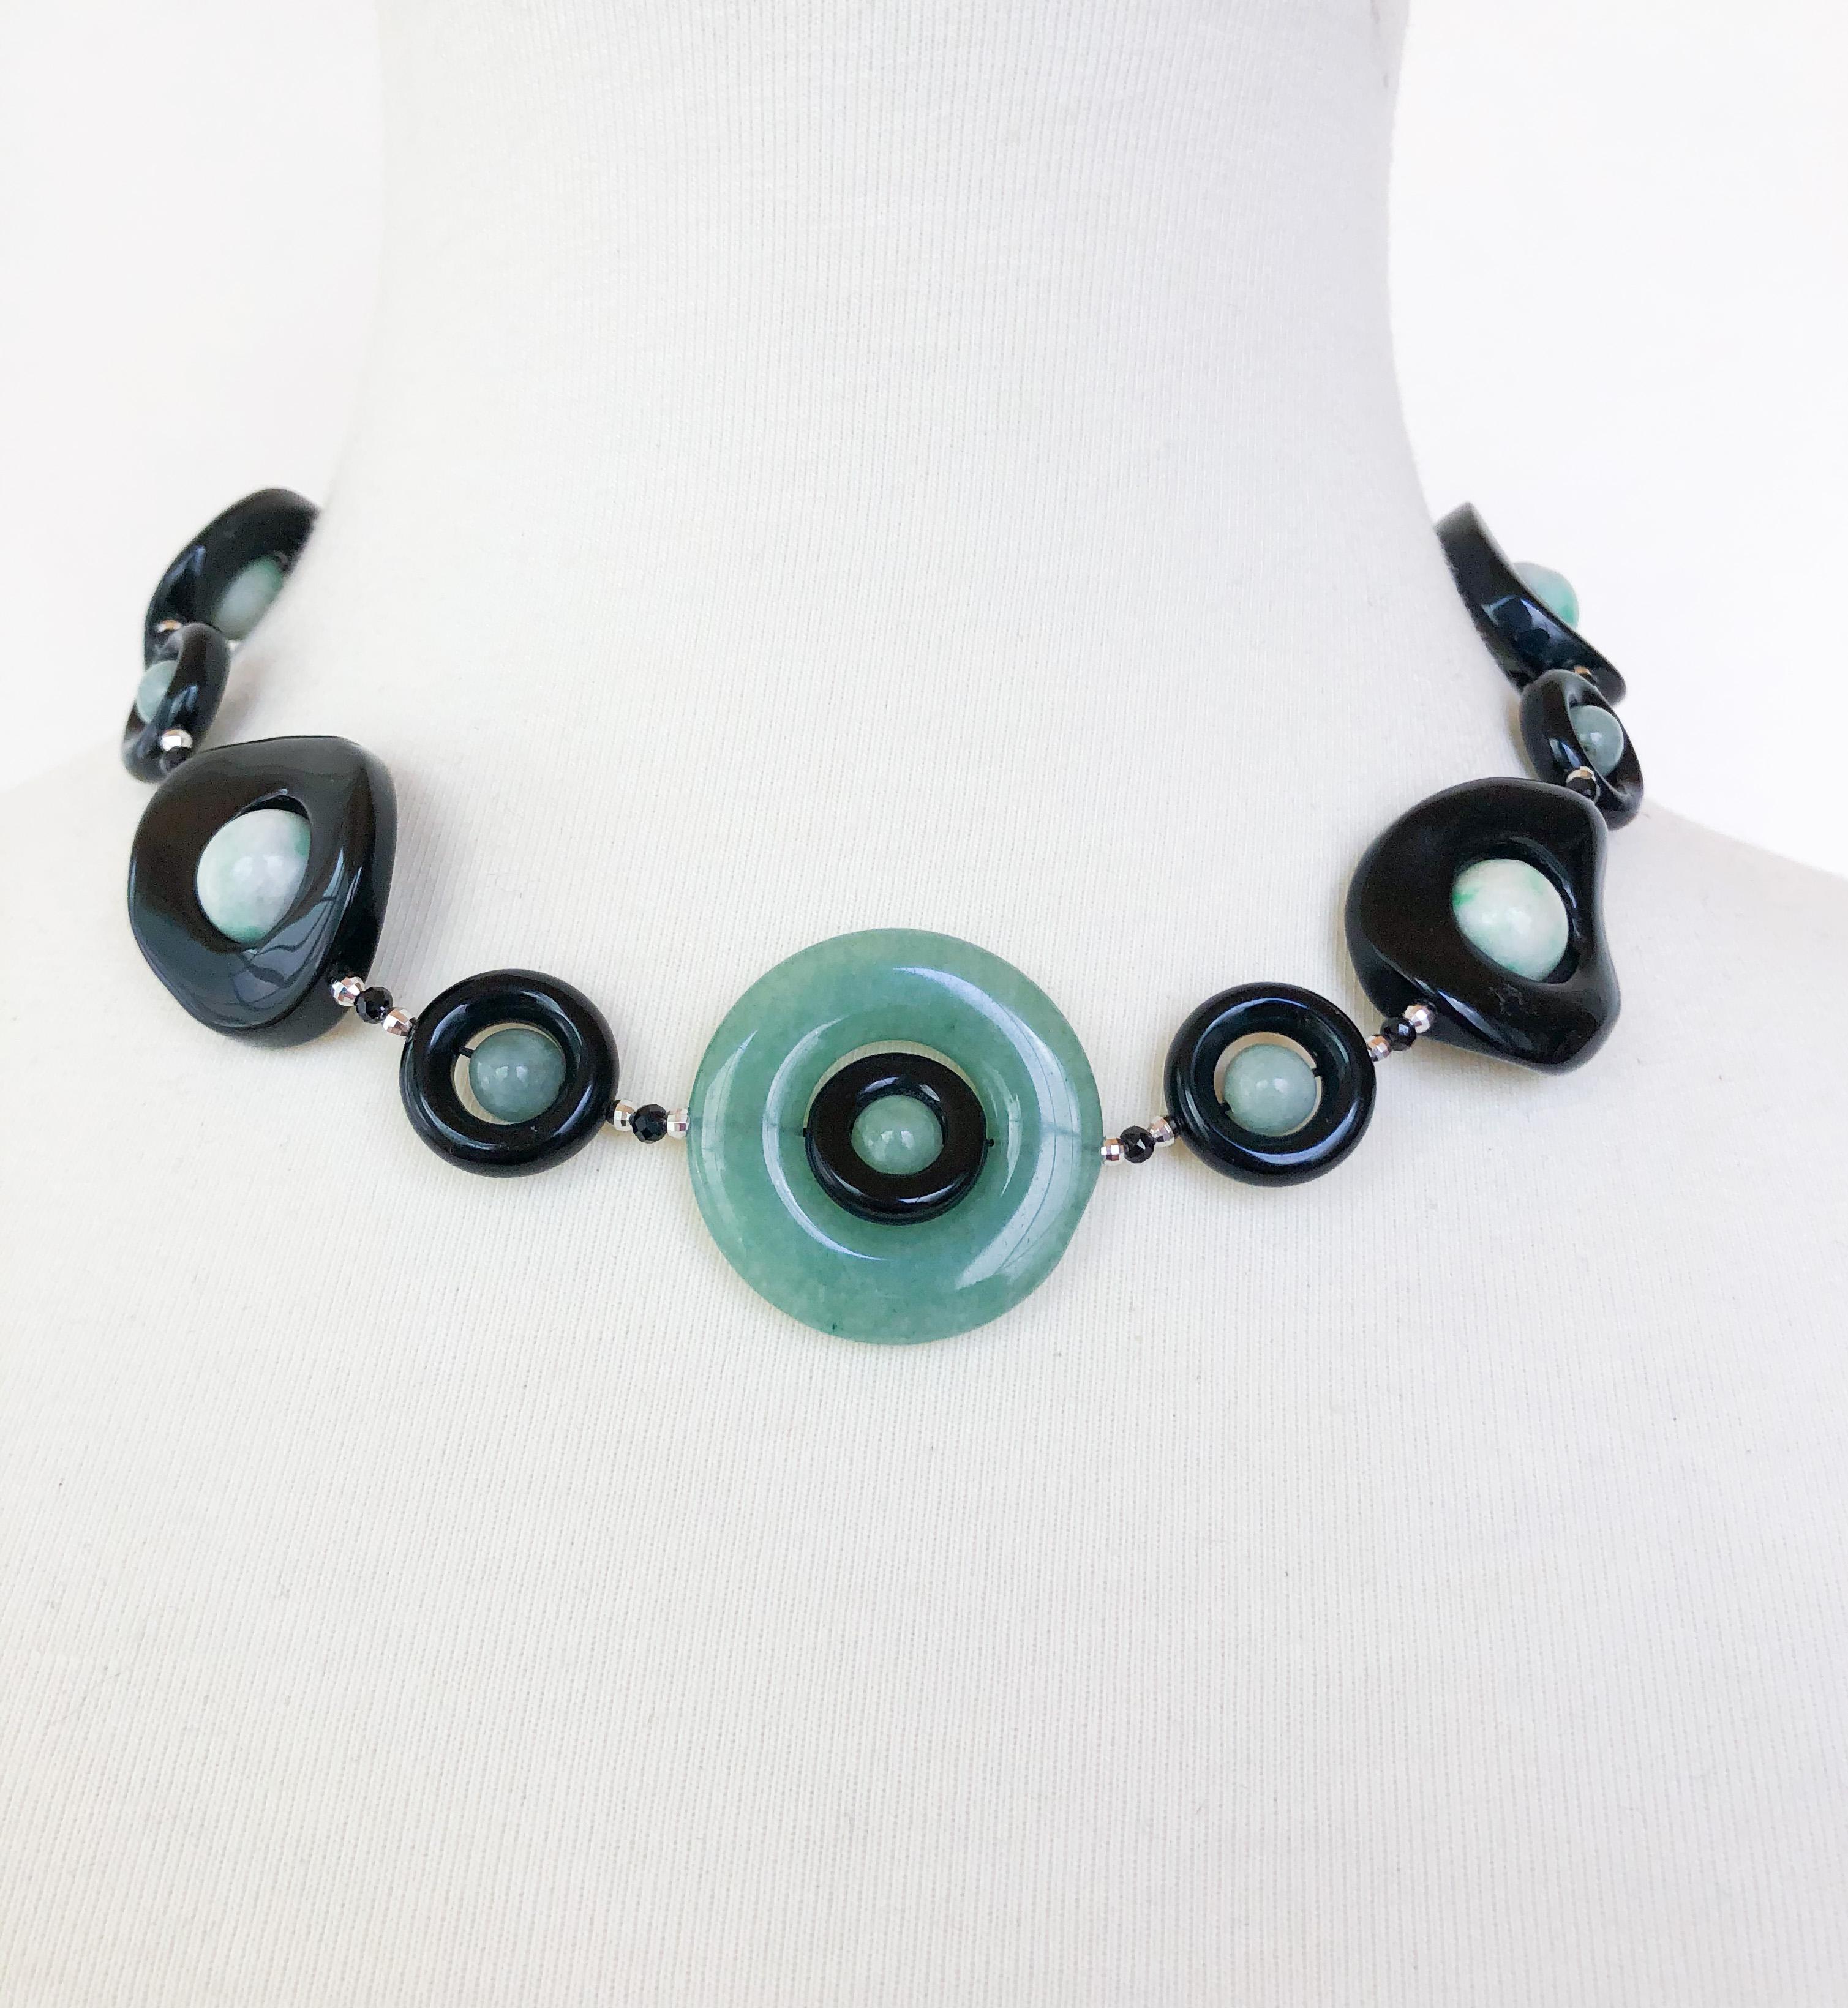 This necklace is made of jade and black onyx, with tiny black spinel and silver beads in between. The center of the necklace features a large jade ring, a small onyx ring, and a small circular jade bead. The rest of the necklace is composed on